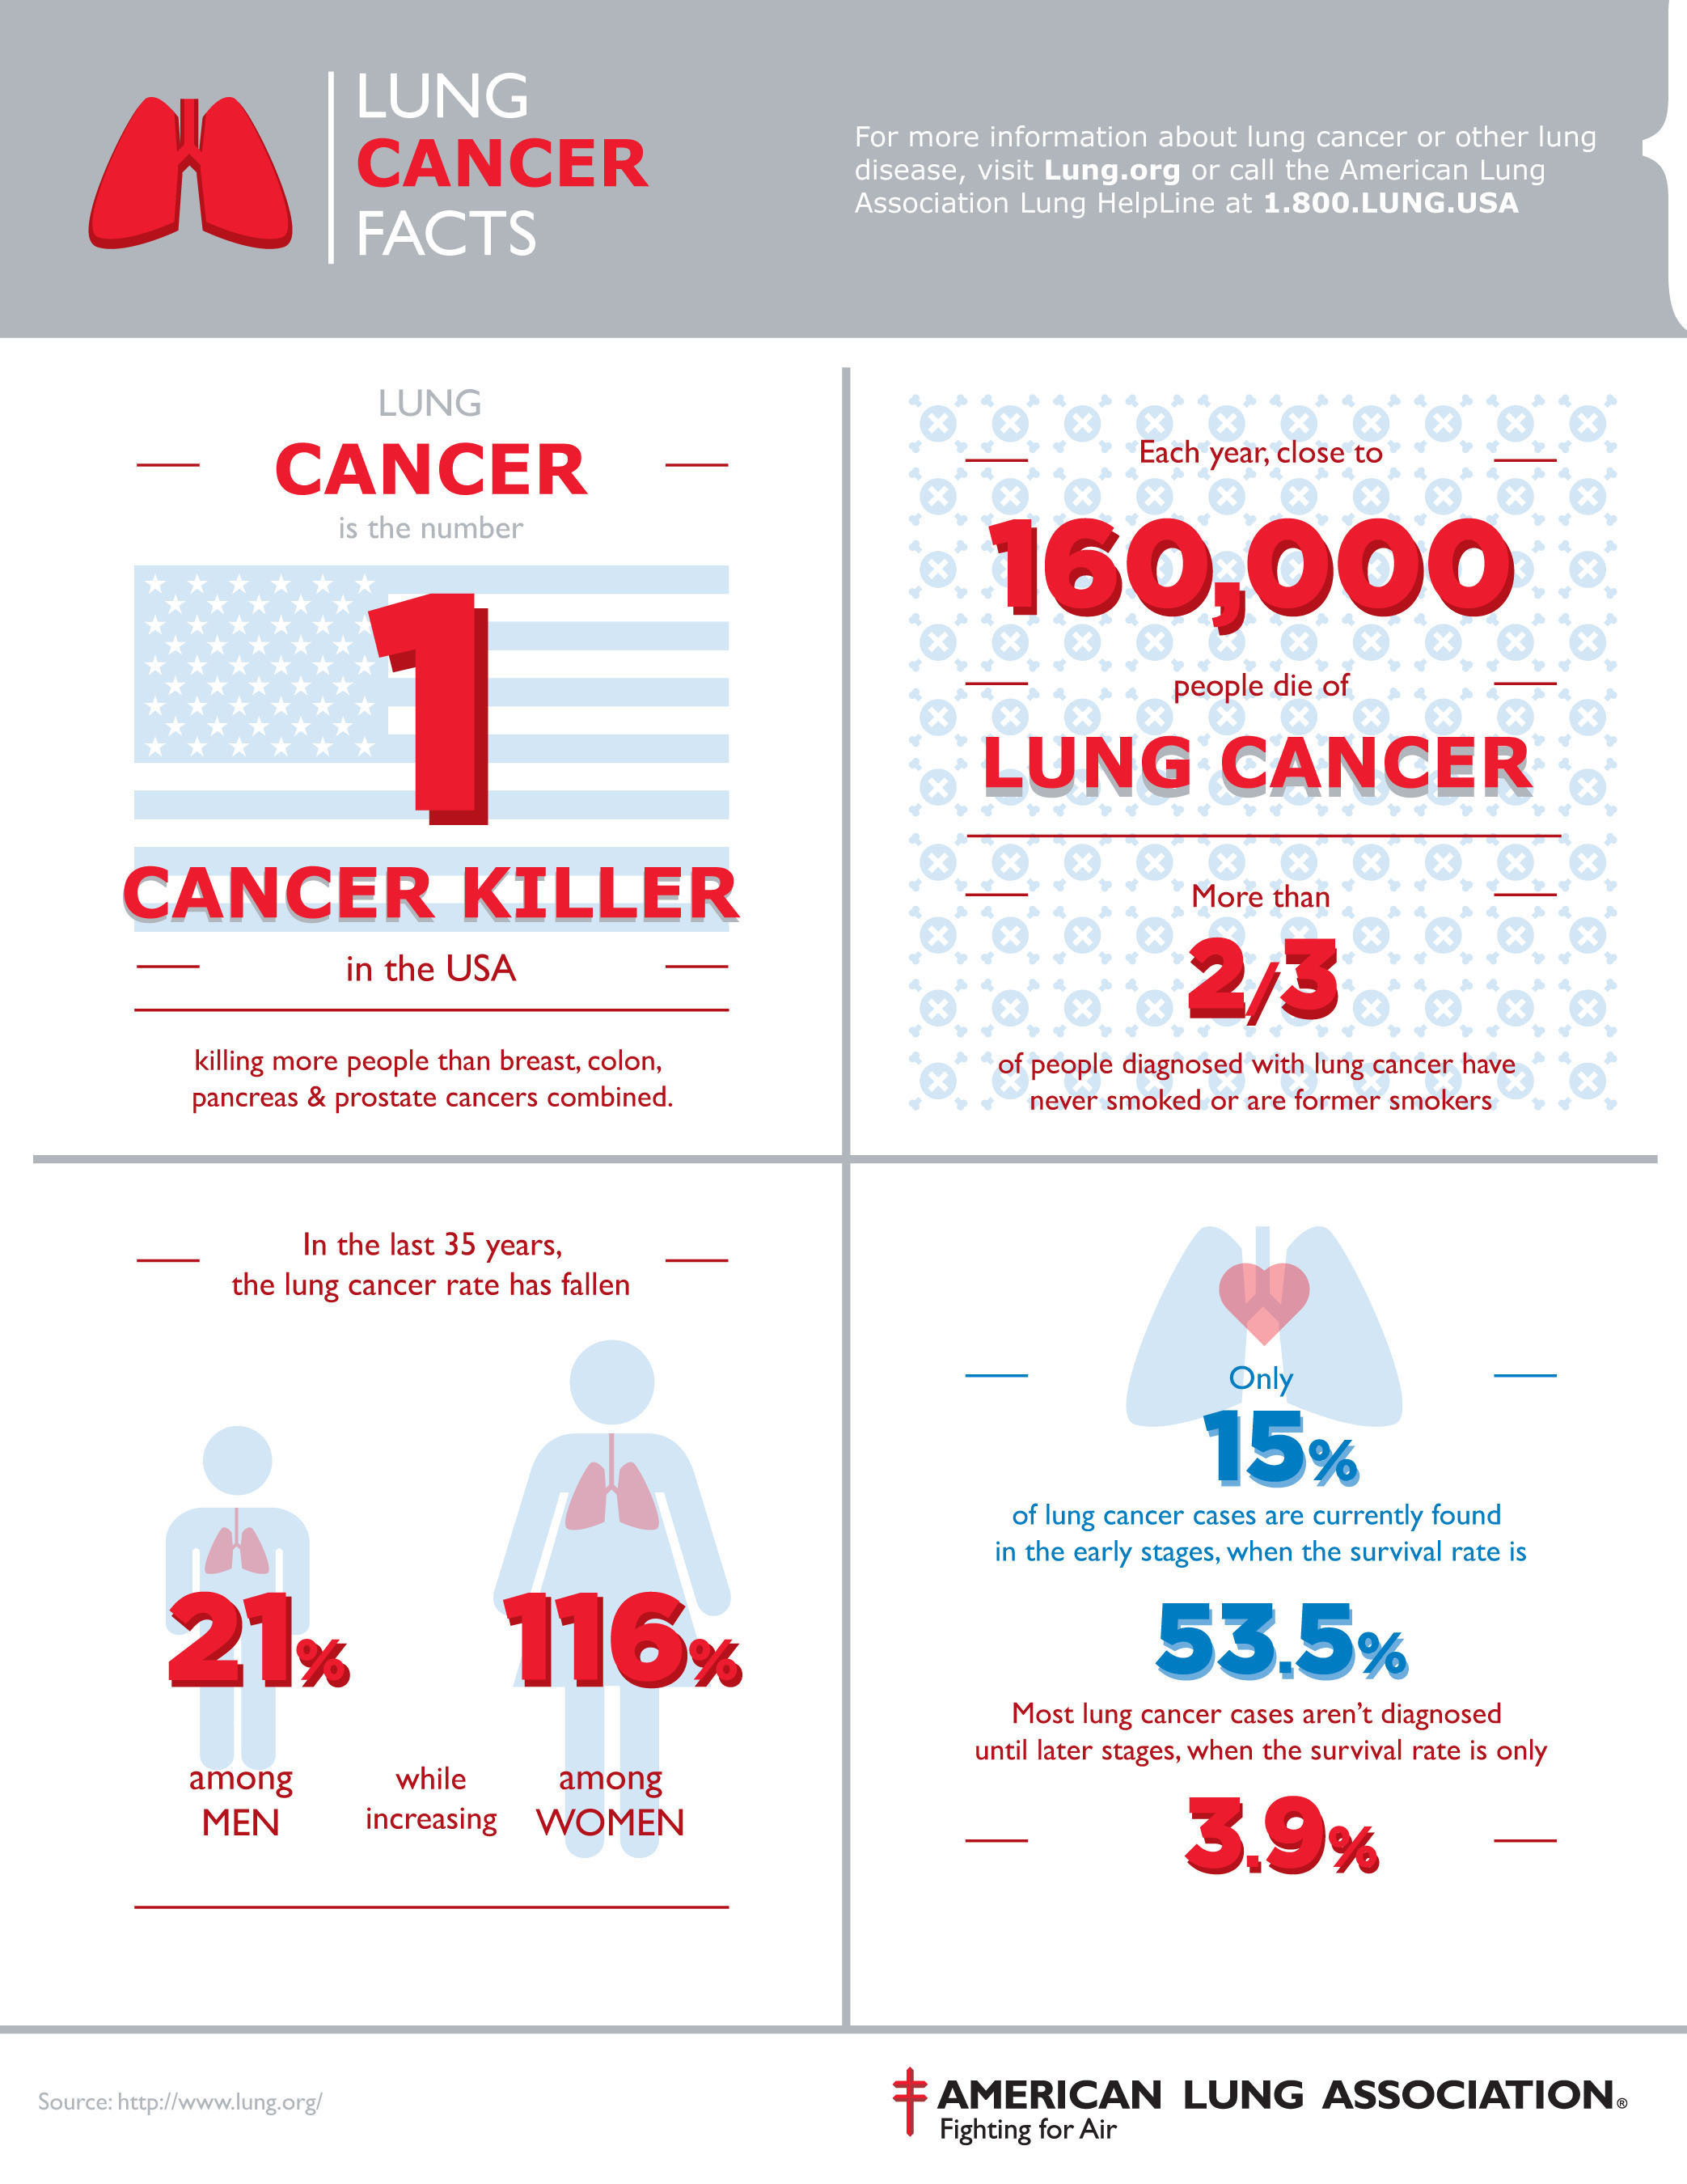 Infographic - Lung Cancer Facts. How much do you know about the #1 cancer killer in America? (PRNewsFoto/American Lung Association) (PRNewsFoto/AMERICAN LUNG ASSOCIATION)